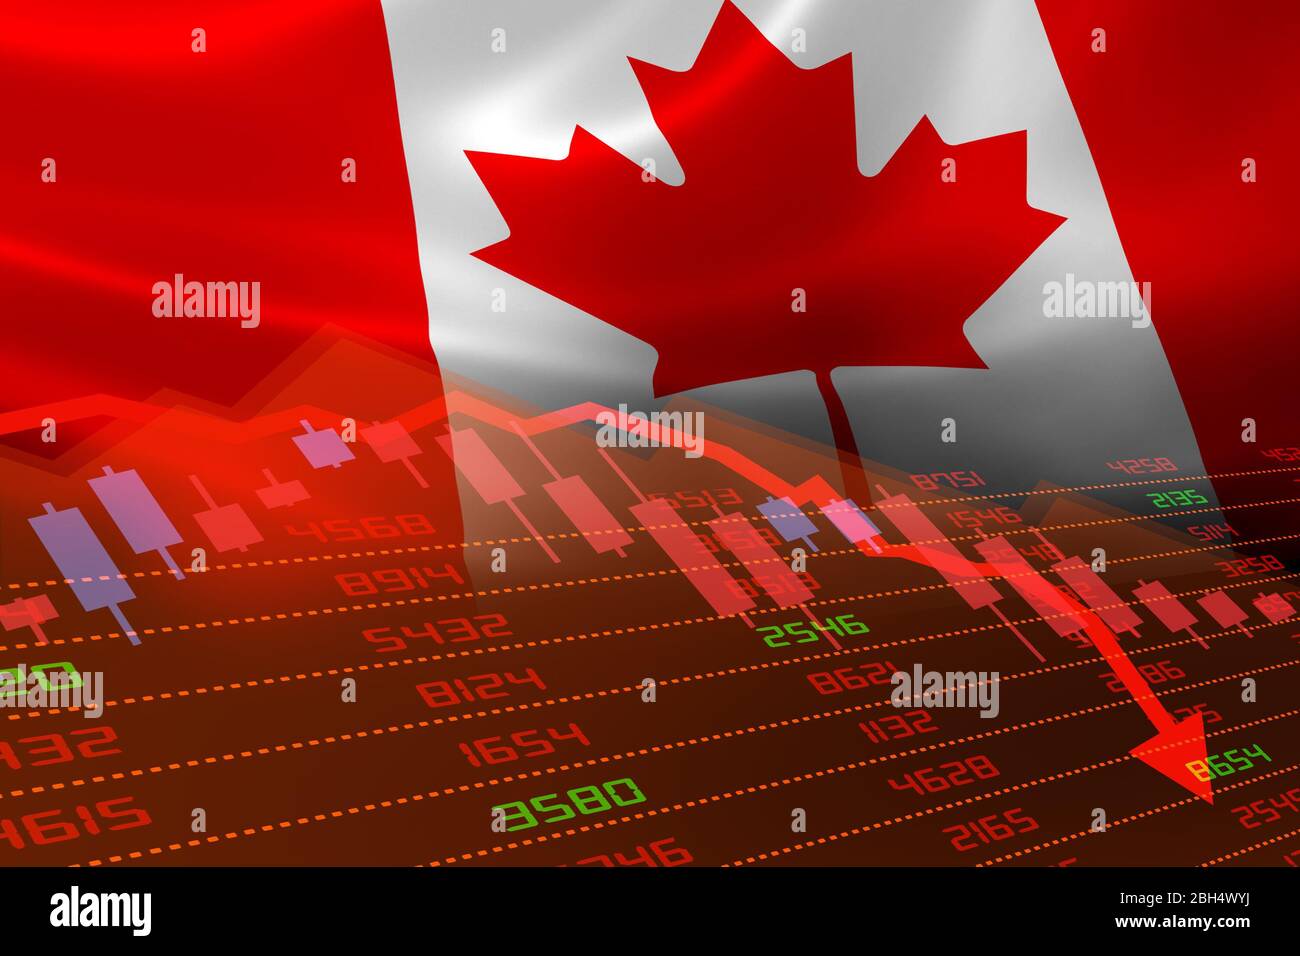 Canada economic downturn with stock exchange market showing stock chart down and in red negative territory. Business and financial money market crisis Stock Photo